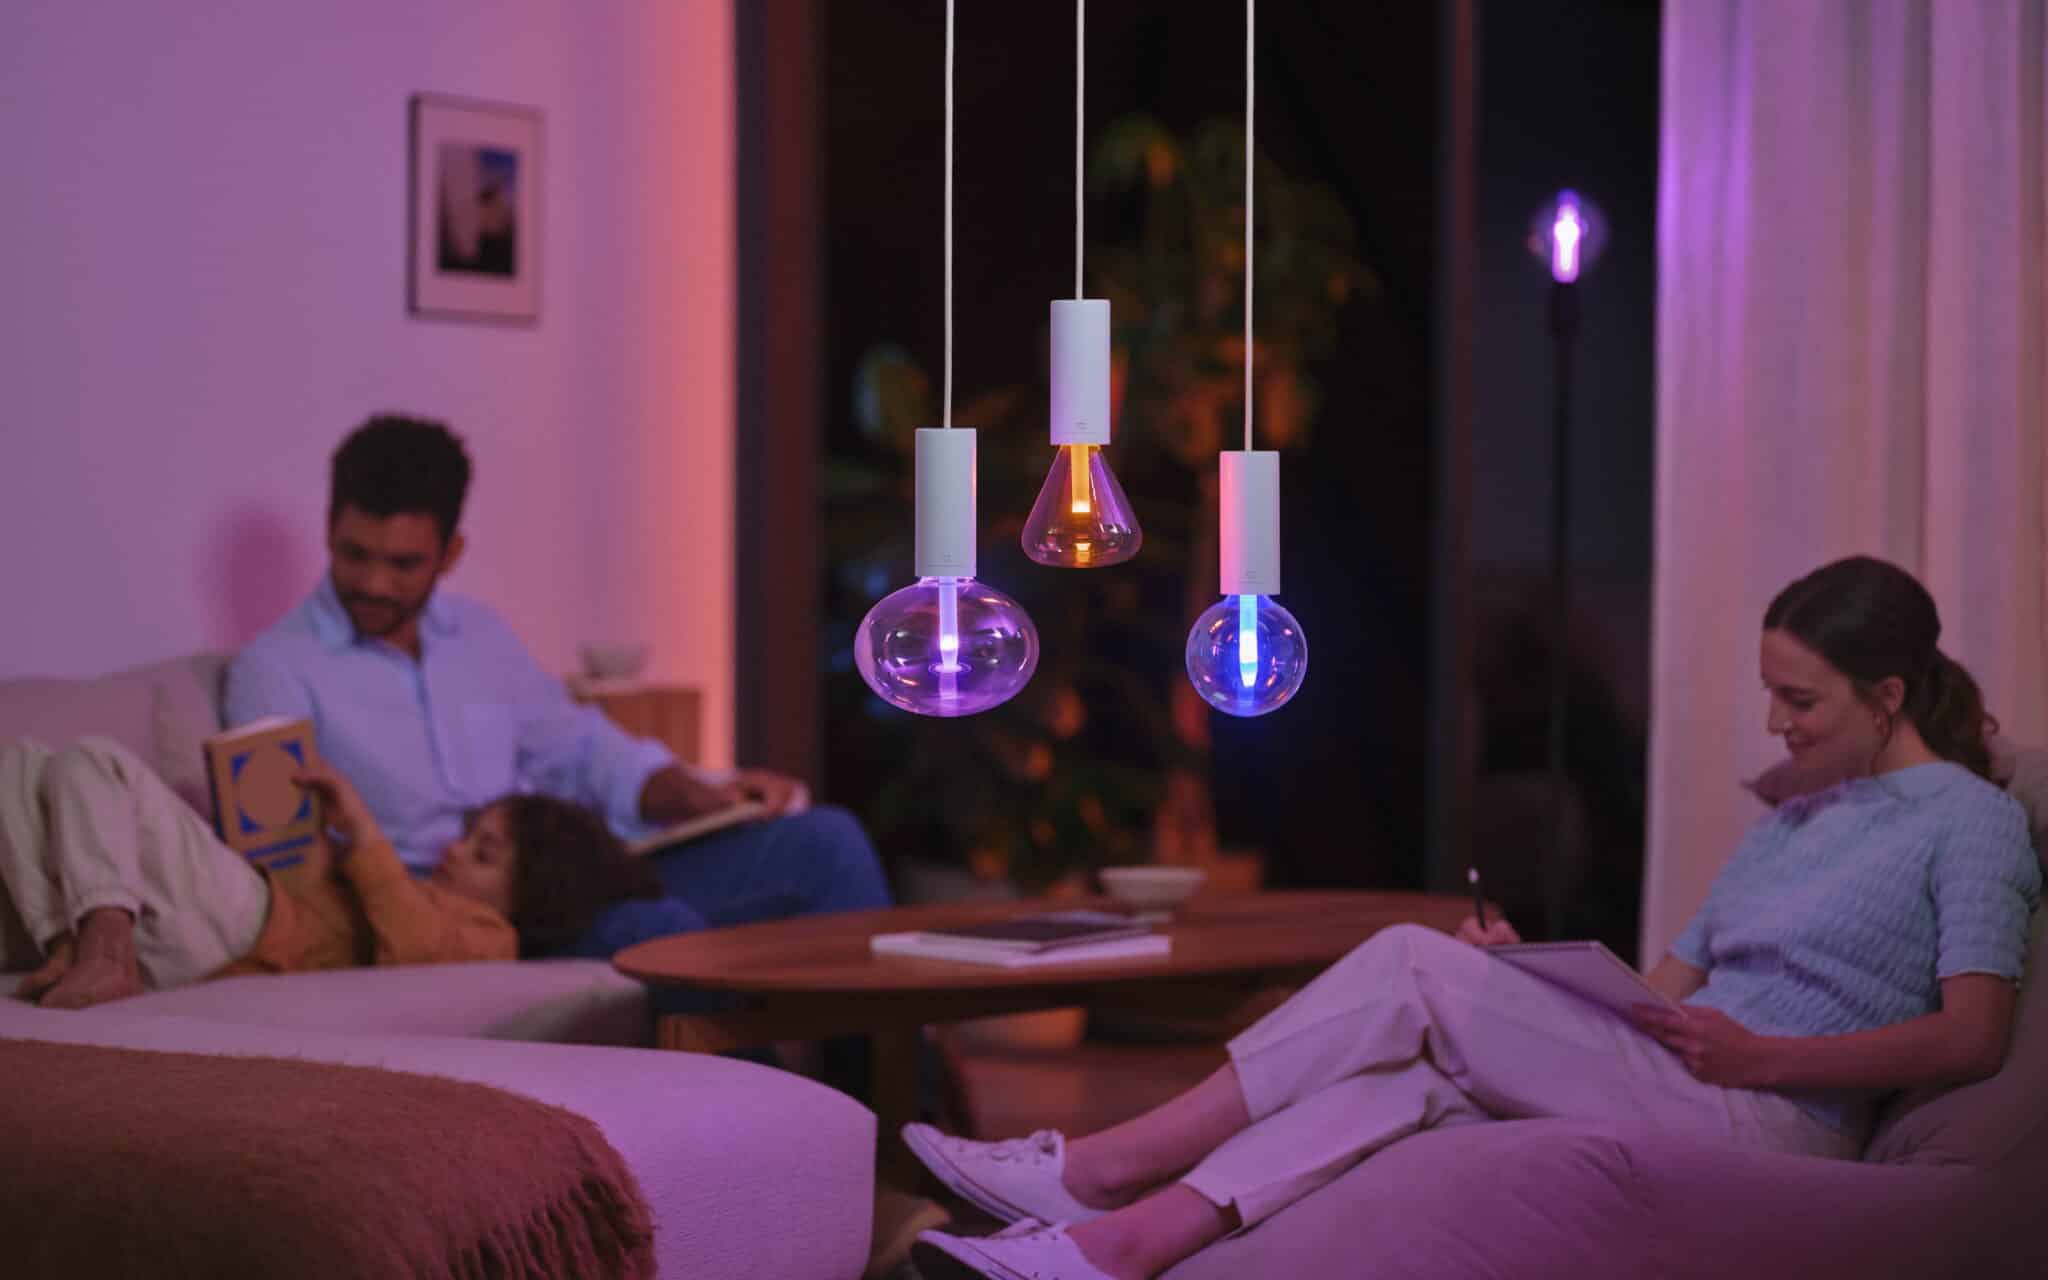 Hueblog: Philips Hue Lightguide: First model available next week